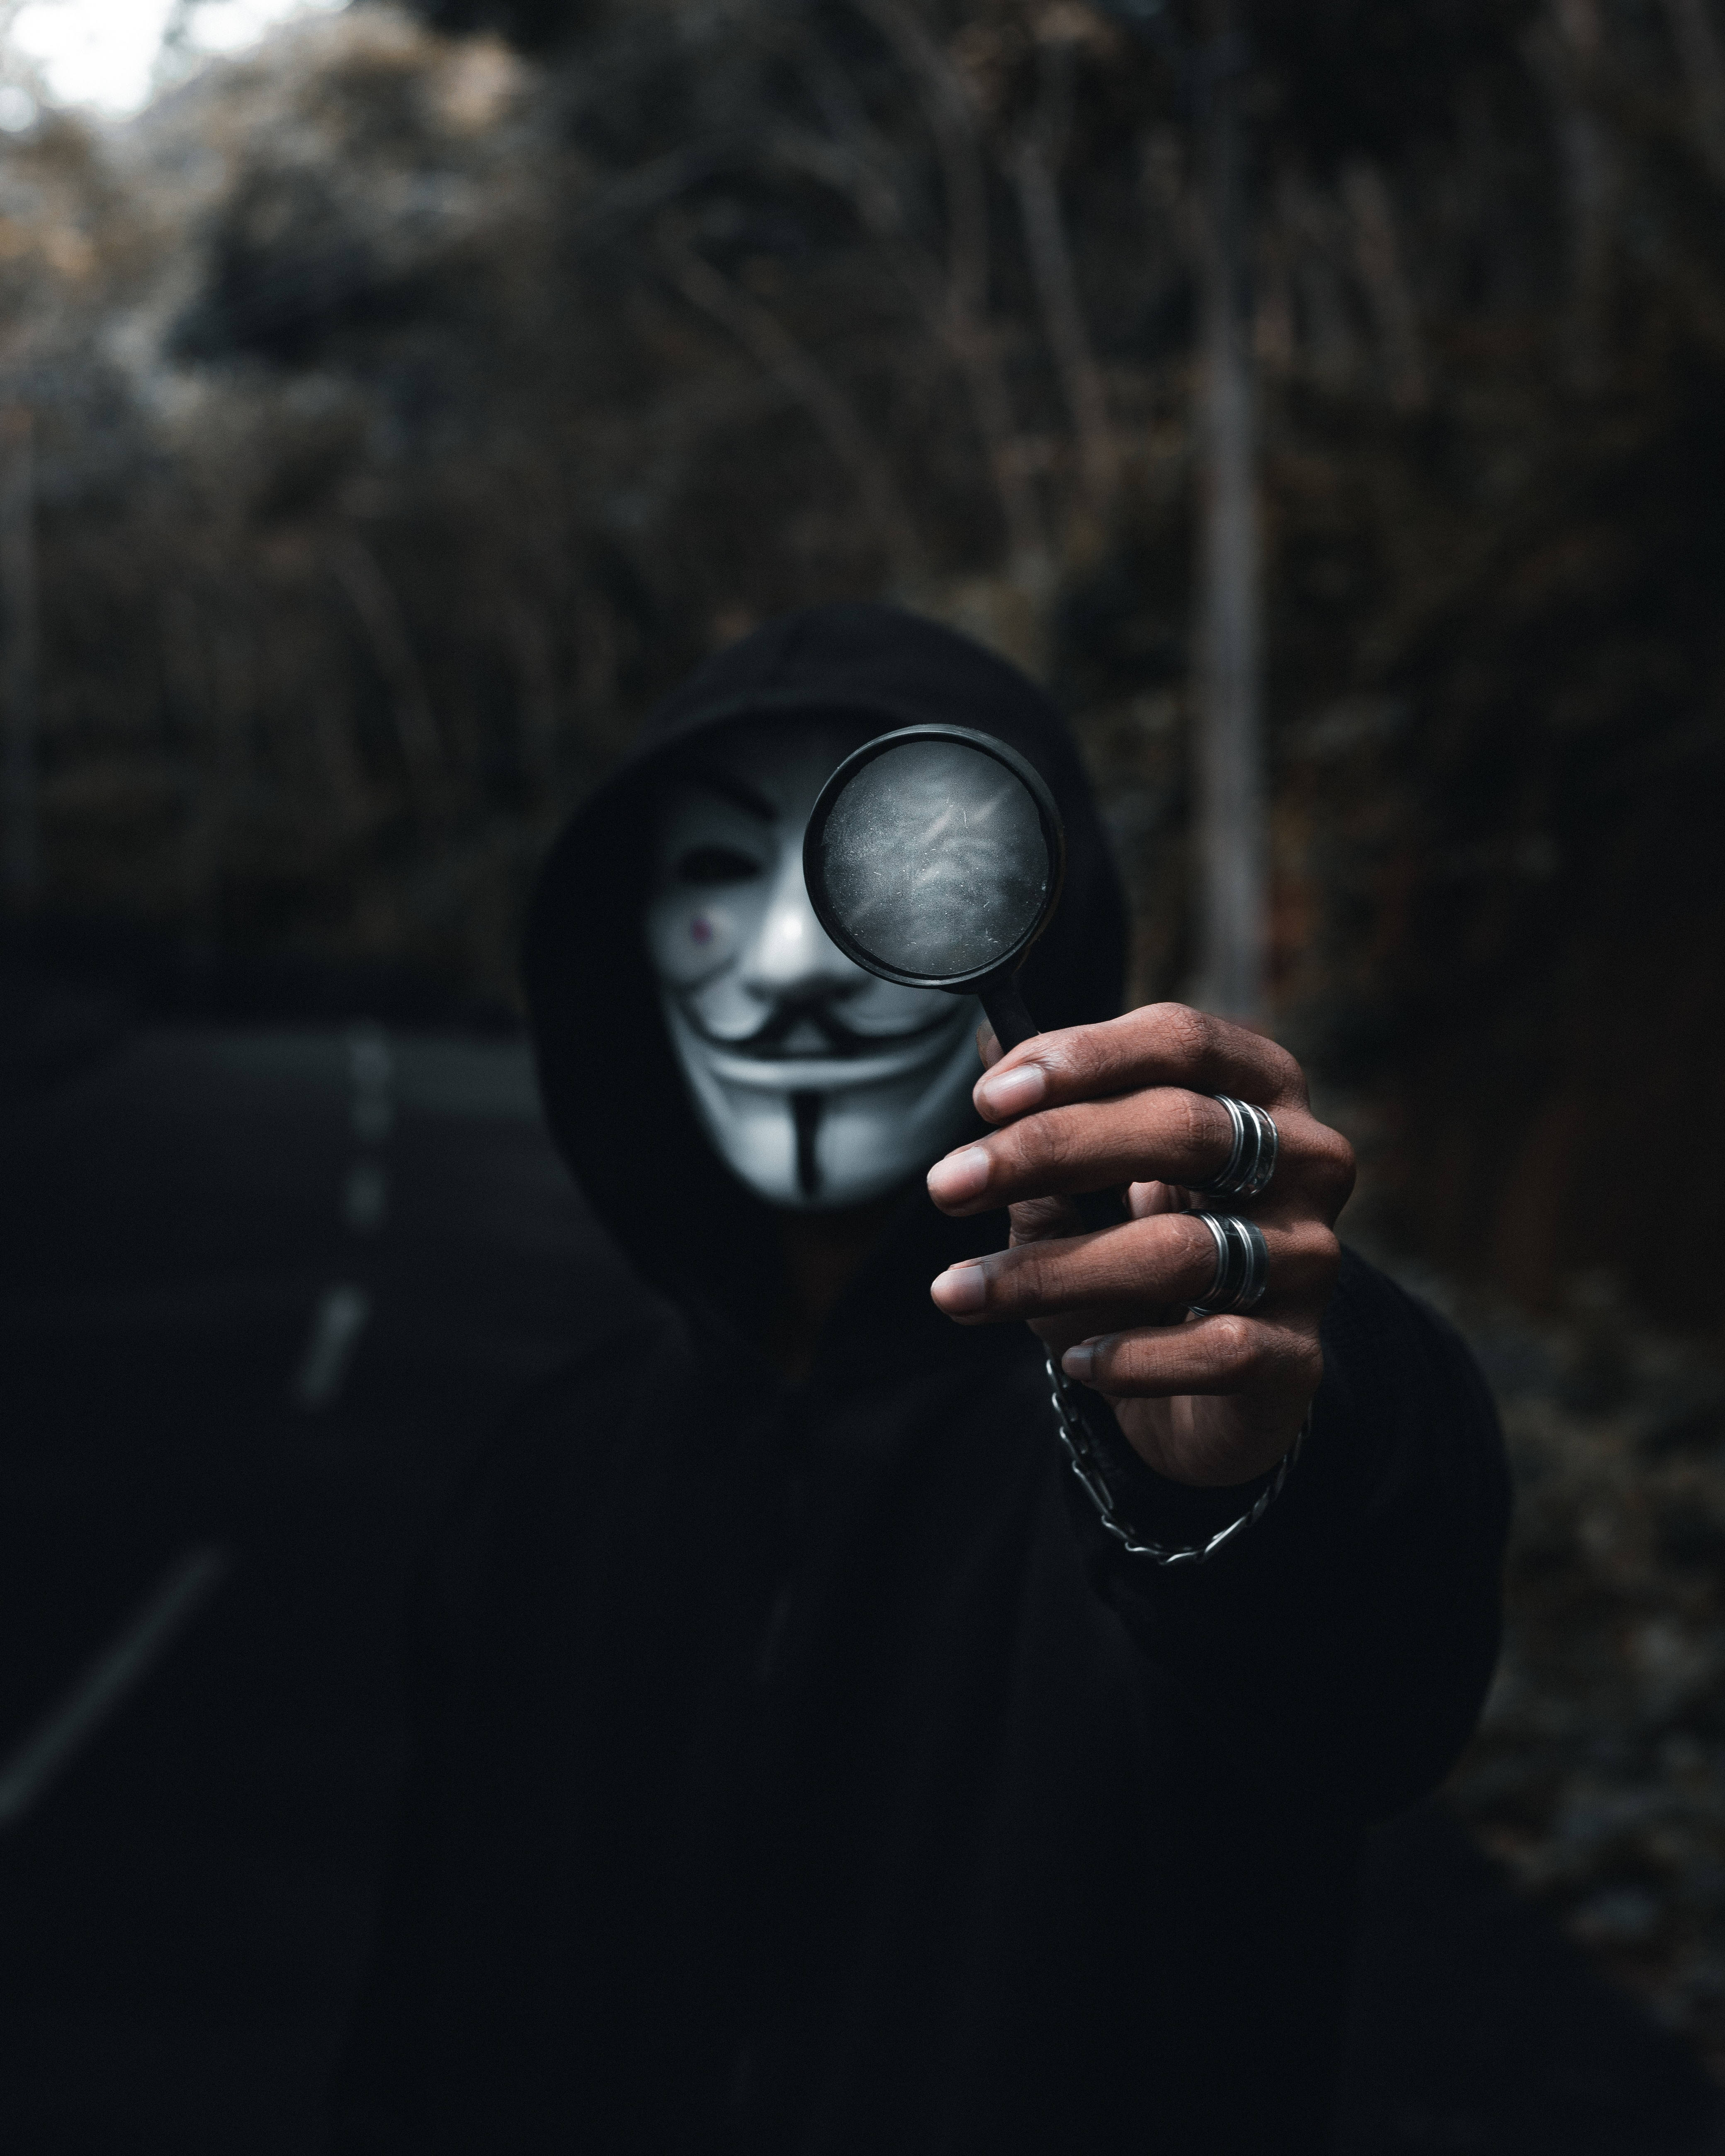 Wallpaper ID: 17326 / mask, hood, anonymous, face, 4k free download